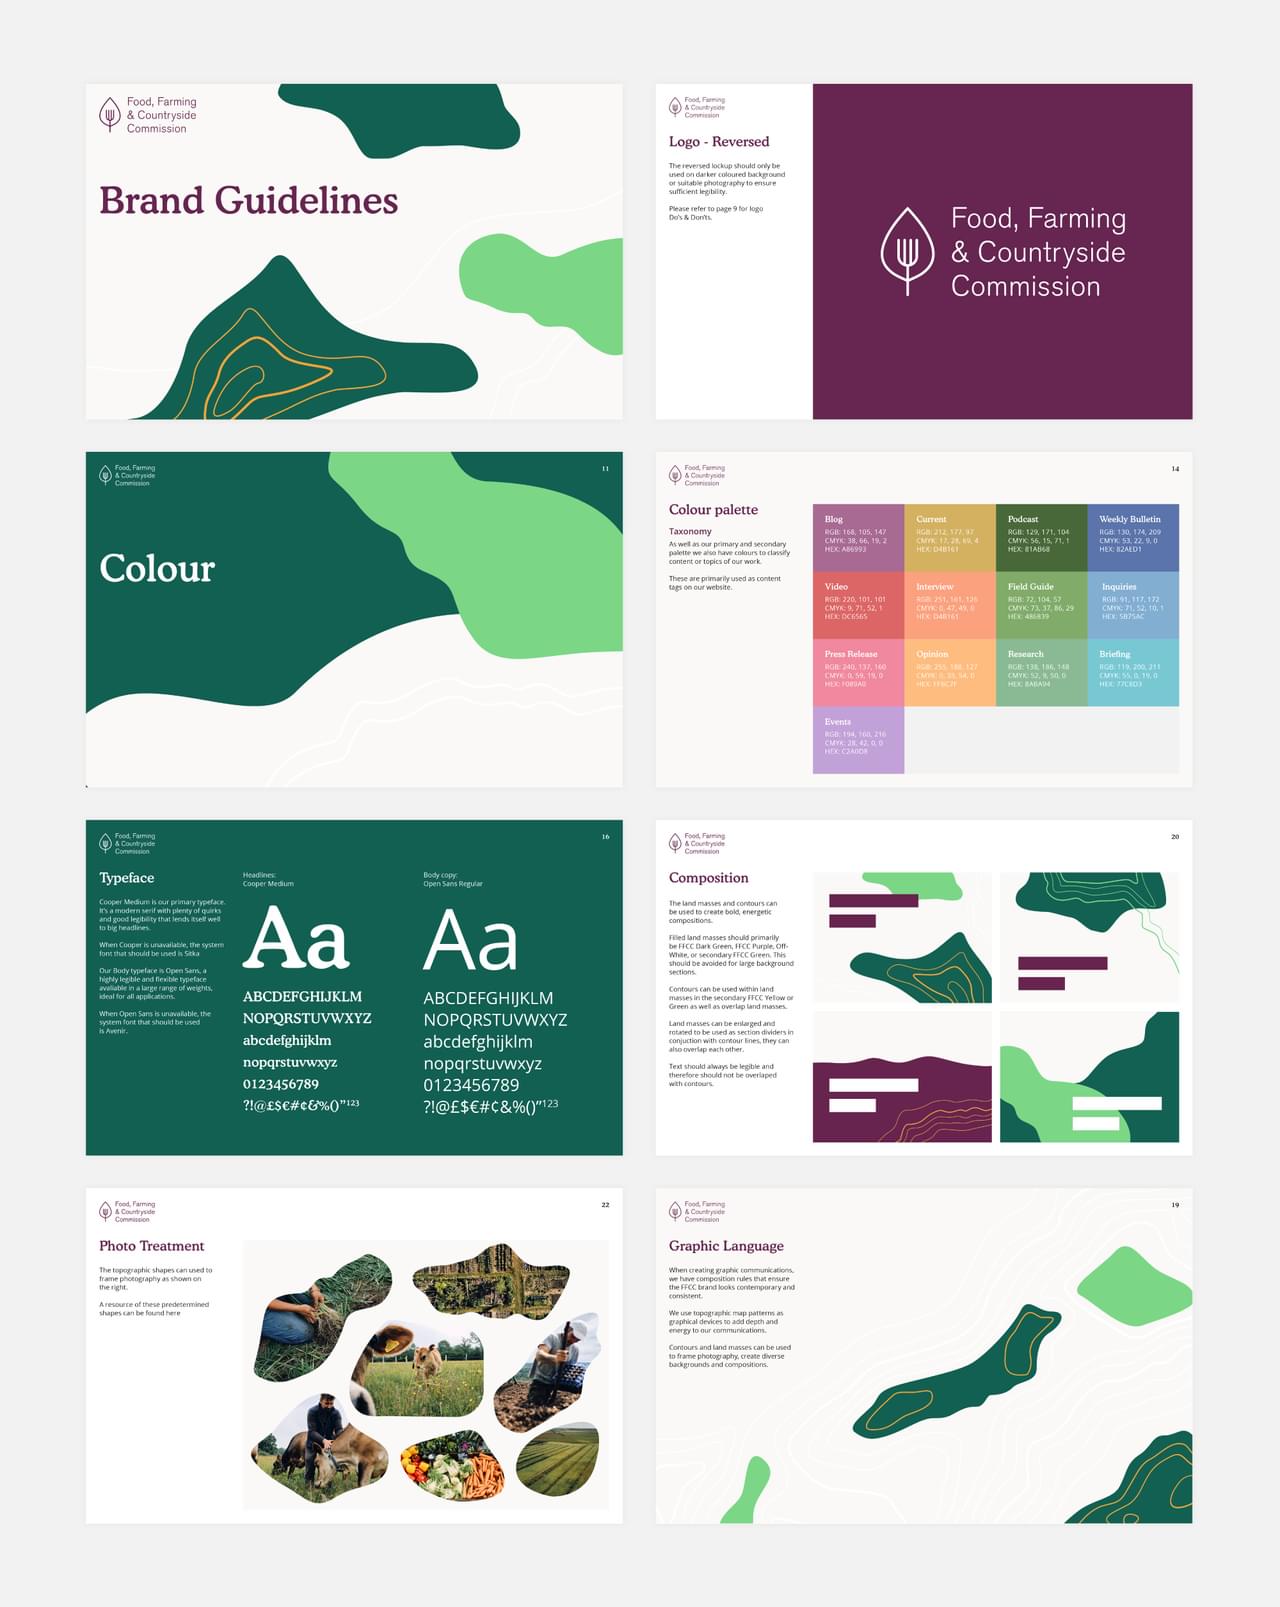 FFCC brand guidelines